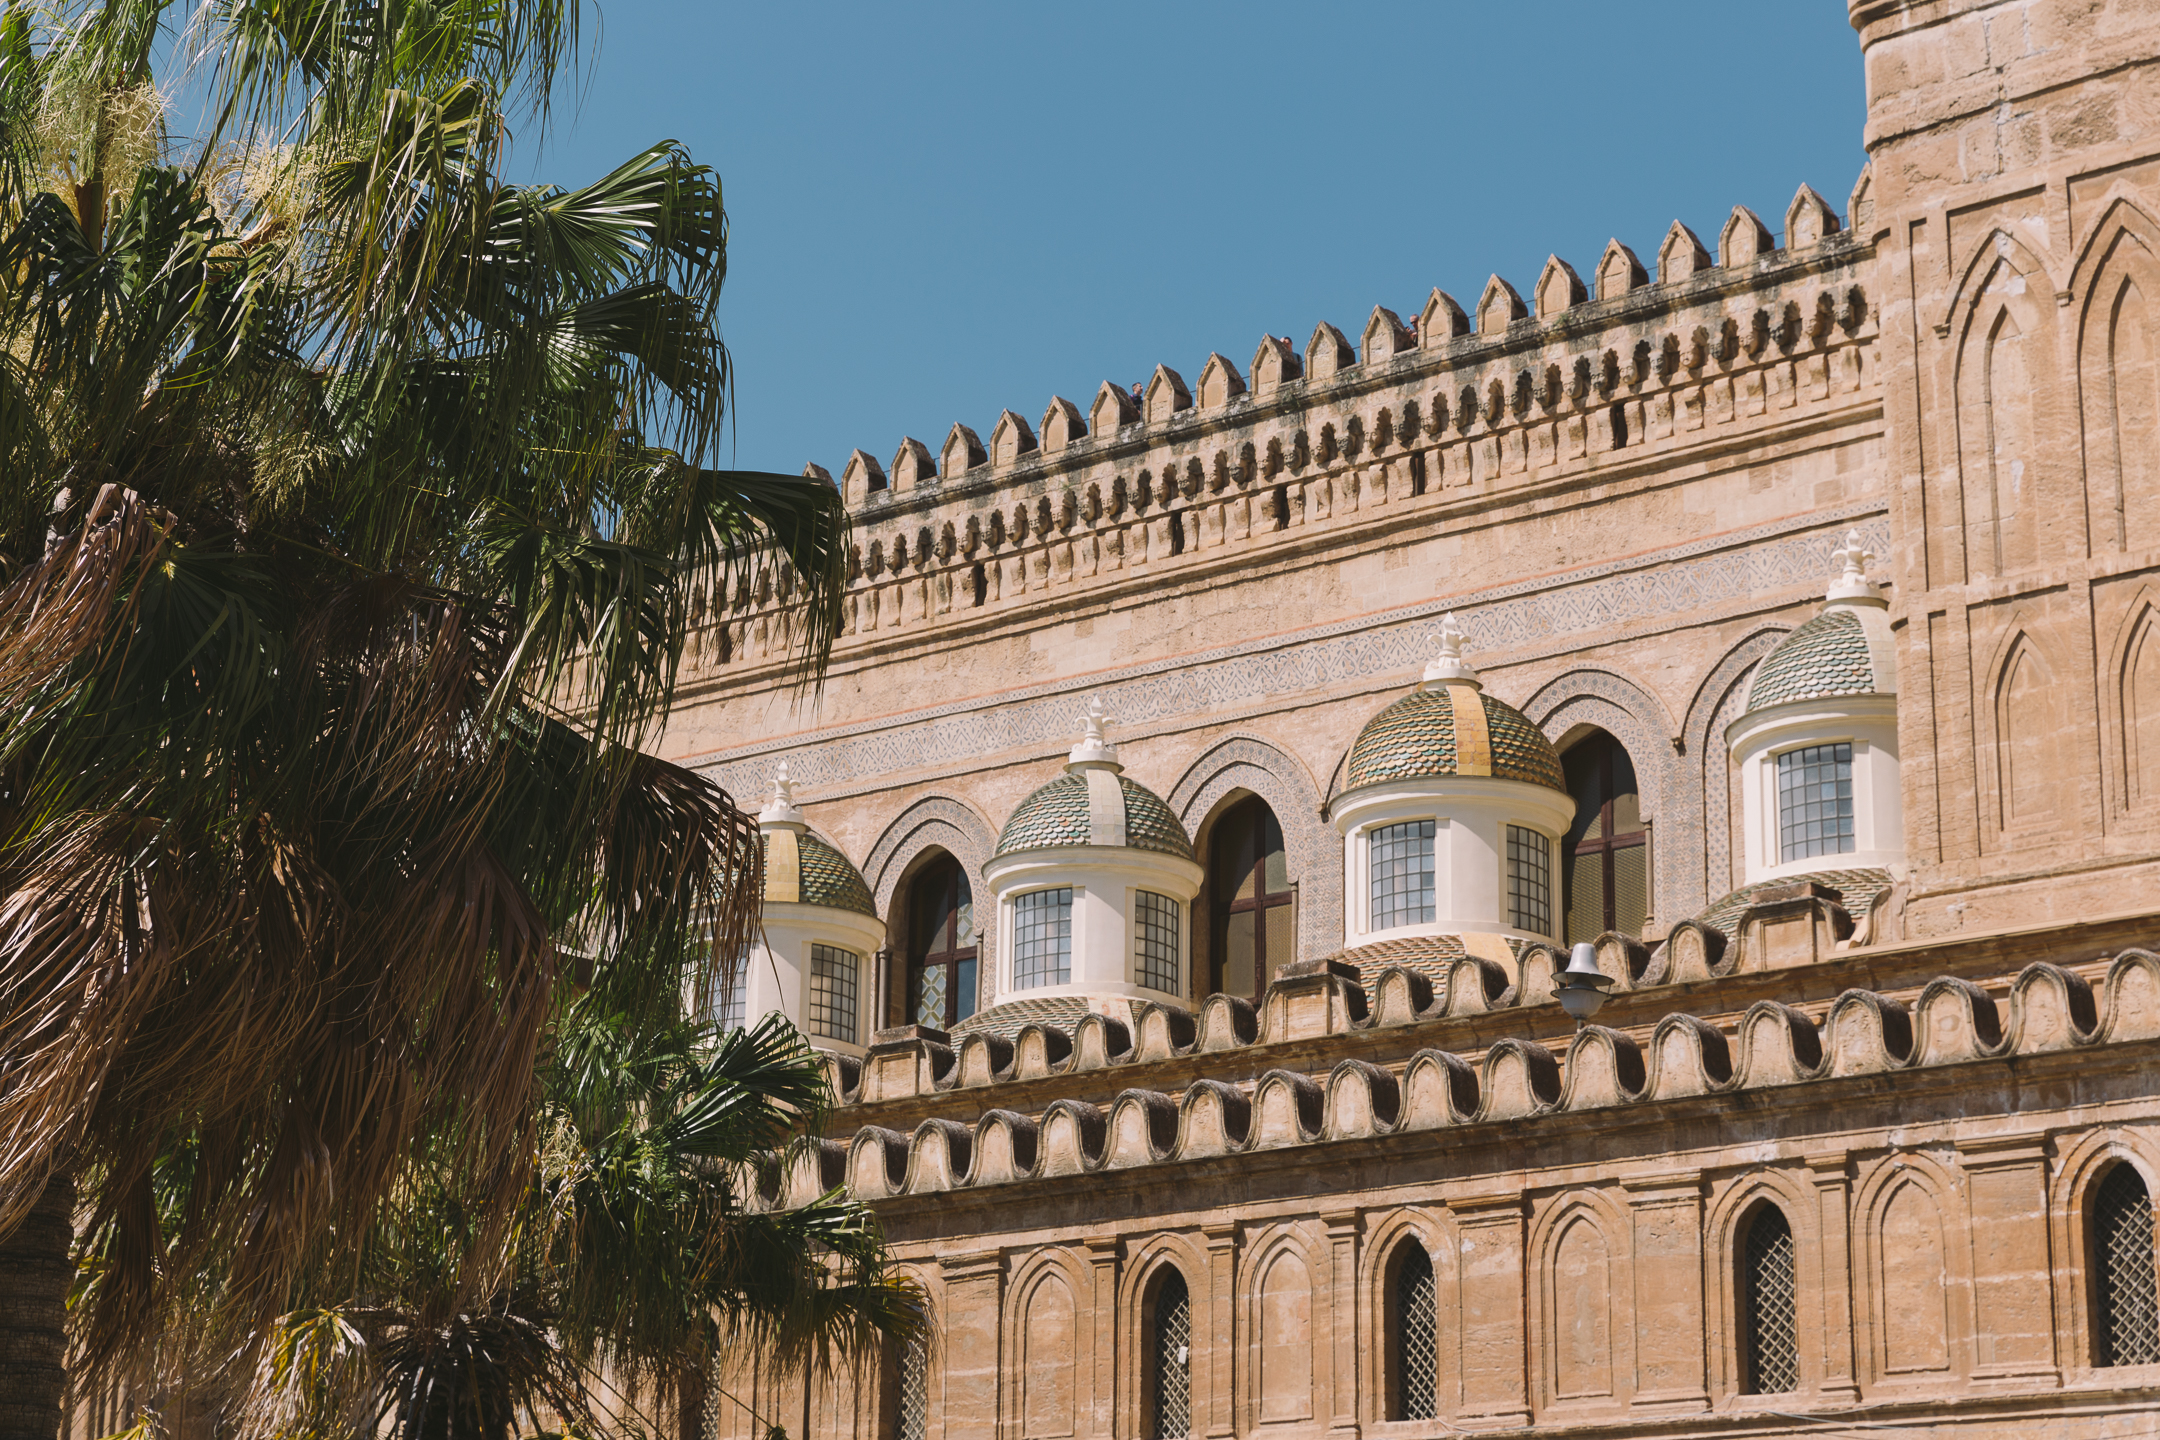 One week in Palermo: What to see, do and eat